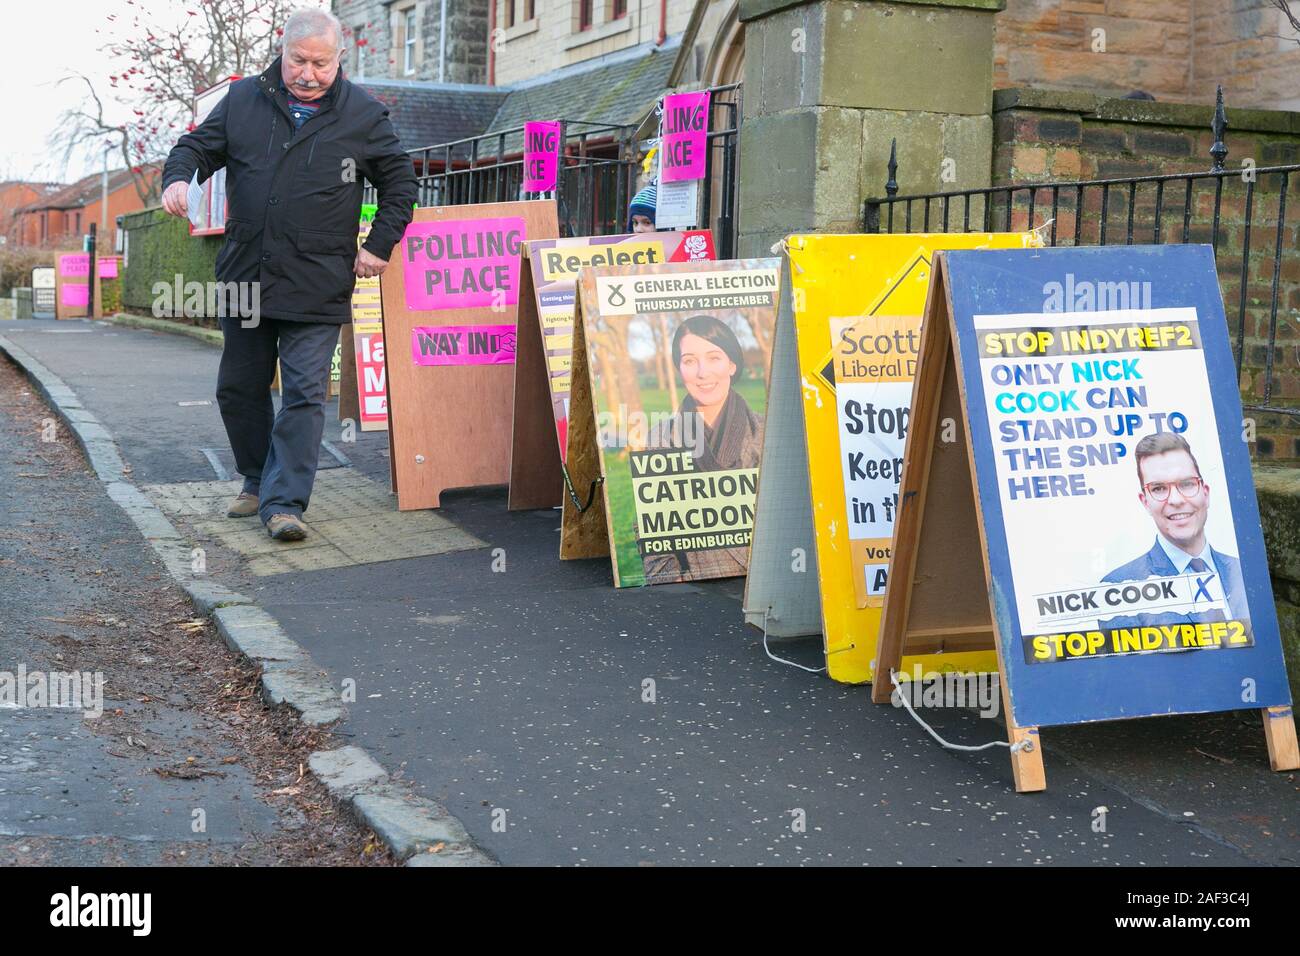 Edinburgh, Scotland, 12th December 2019. A committed voter at the UK's winter General Election exits the Polling Station after casting his vote. Credit: Brian Wilson/Alamy Live News. Stock Photo